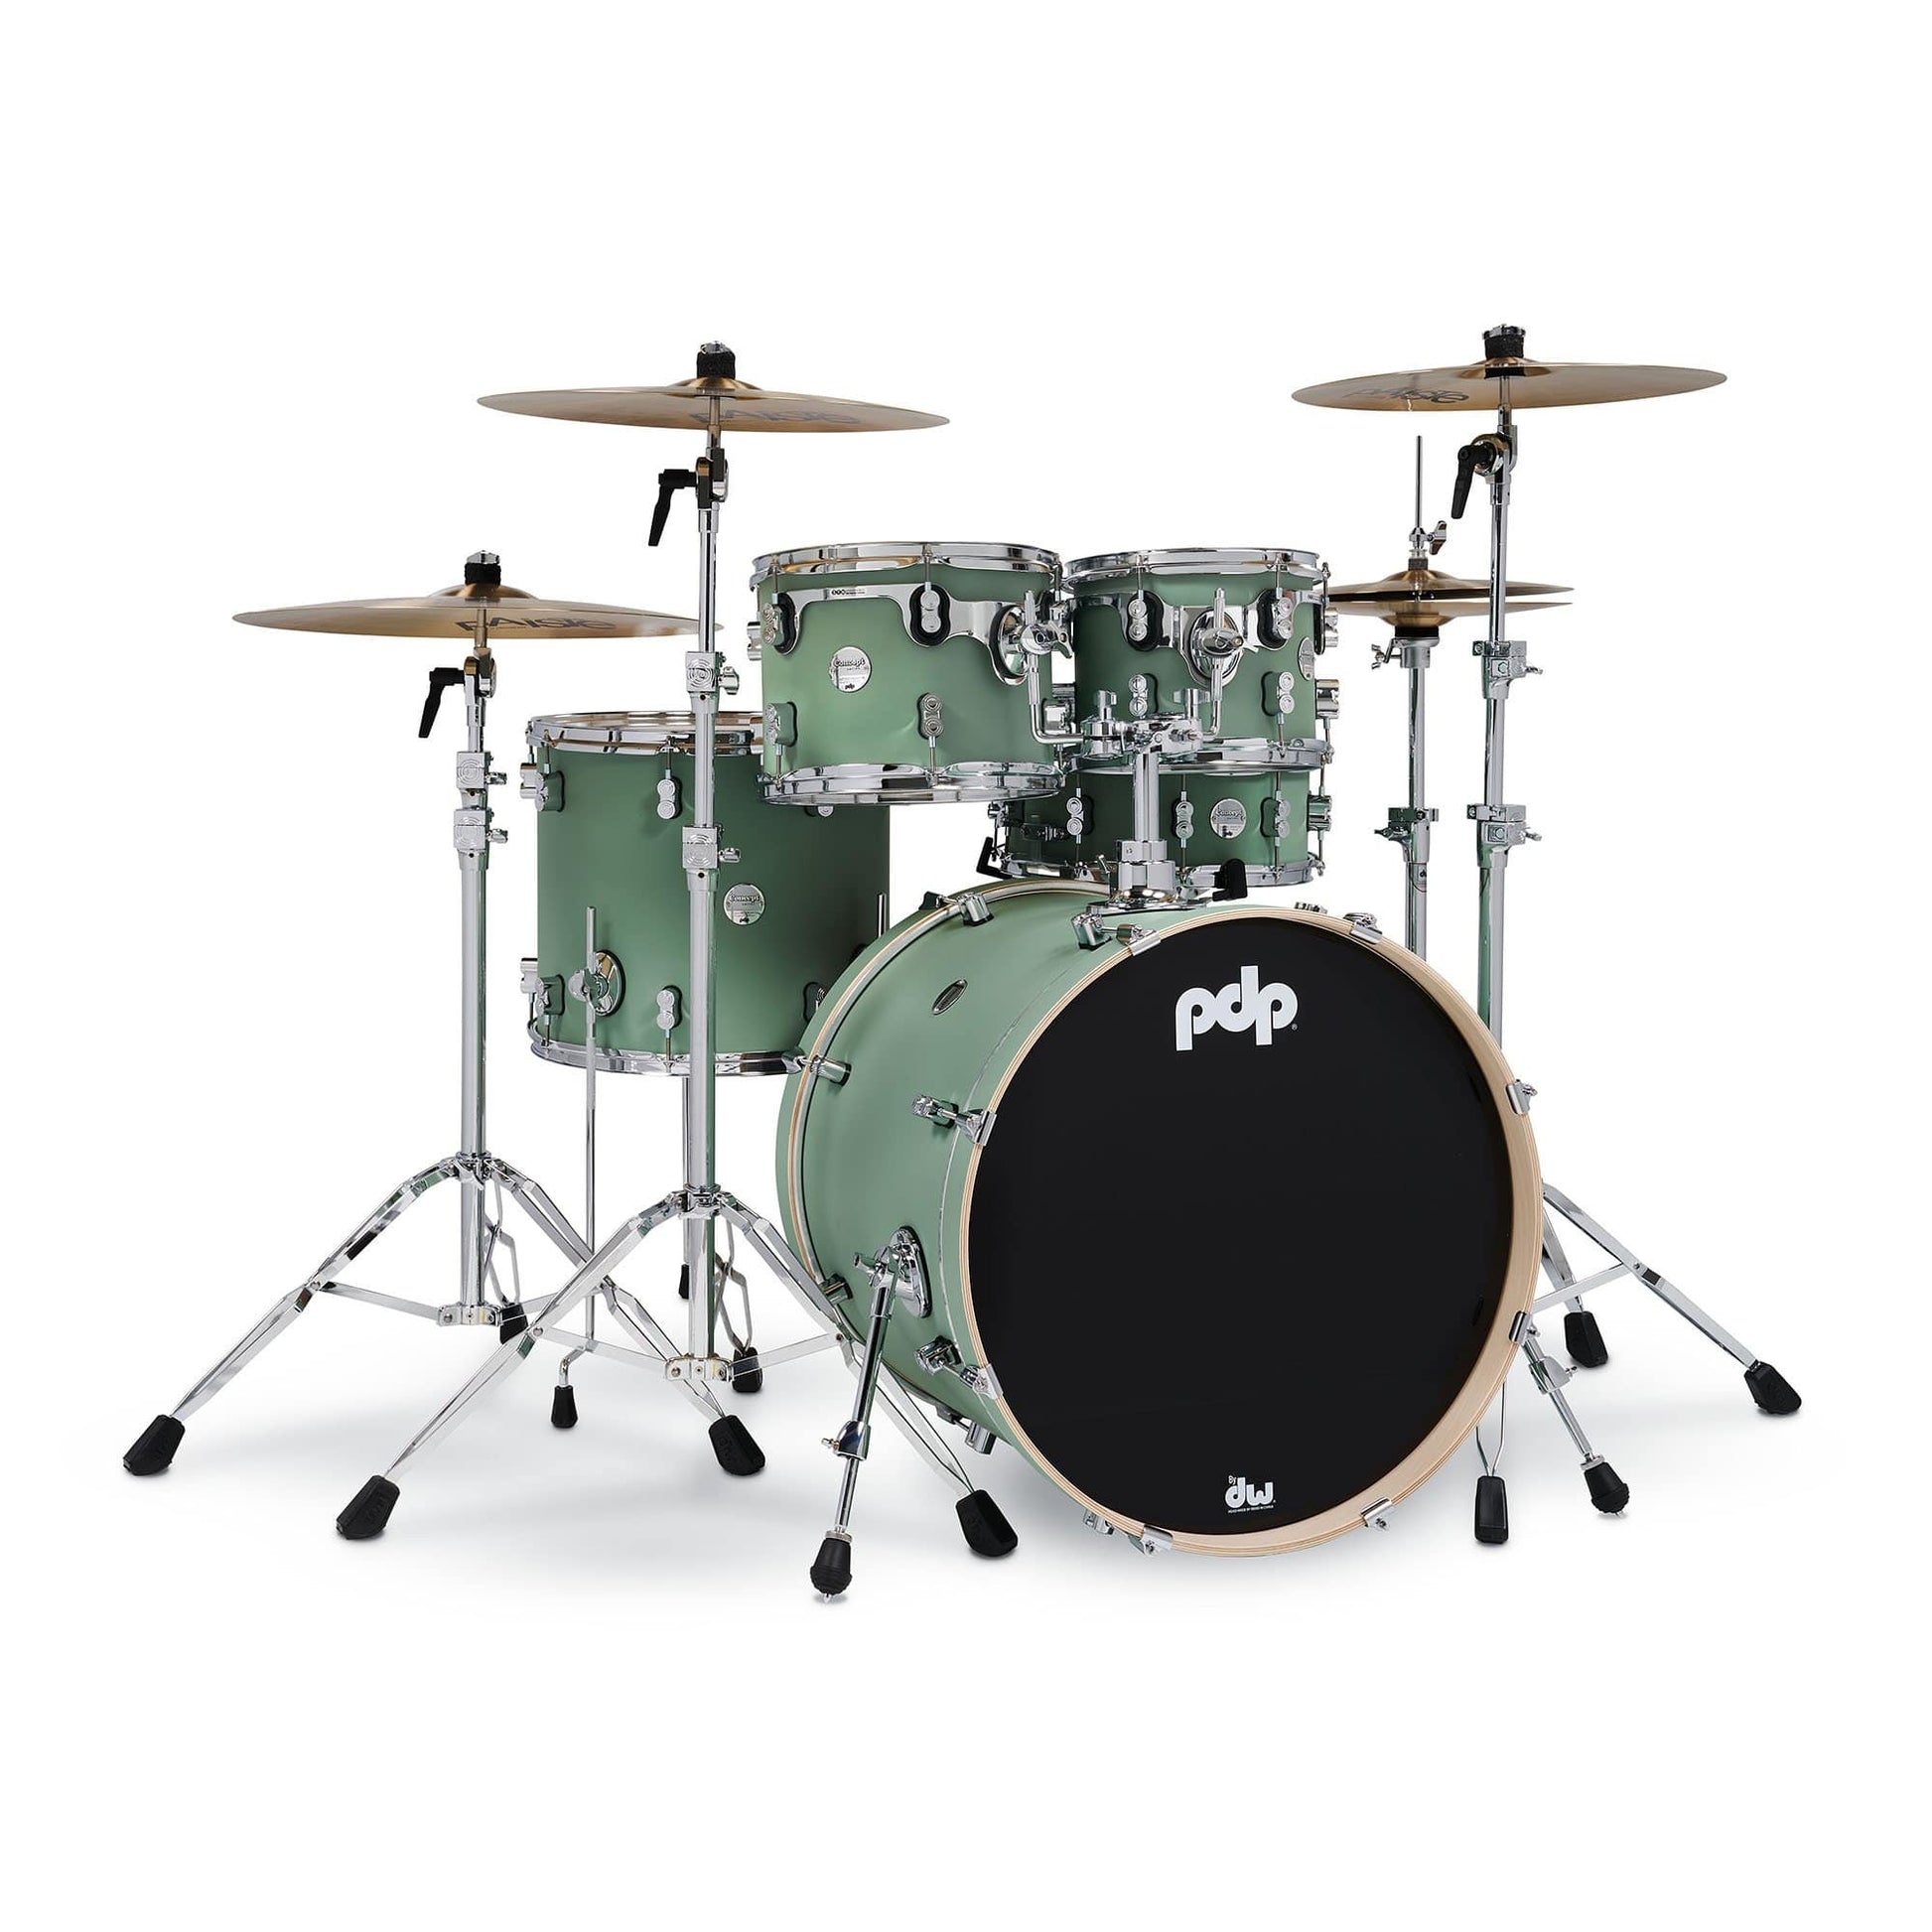 PDP Concept Maple 10/12/16/22/5.5x14 5pc. Drum Kit Satin Seafoam Drums and Percussion / Acoustic Drums / Full Acoustic Kits